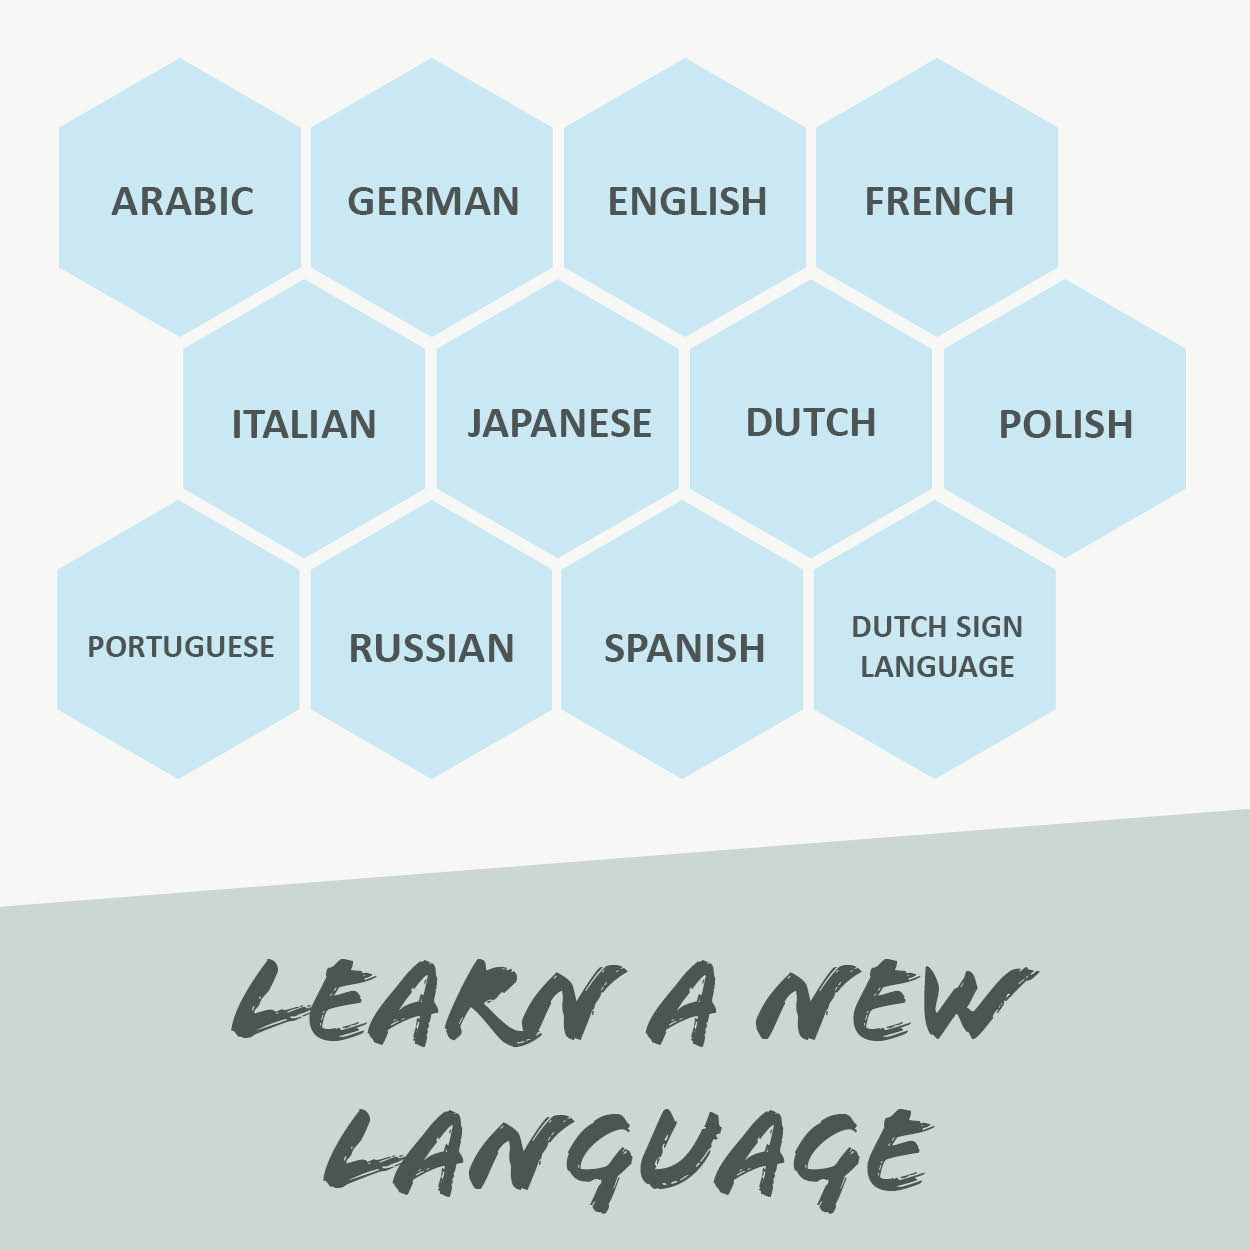 Start your new chapter in September, learn a new language!